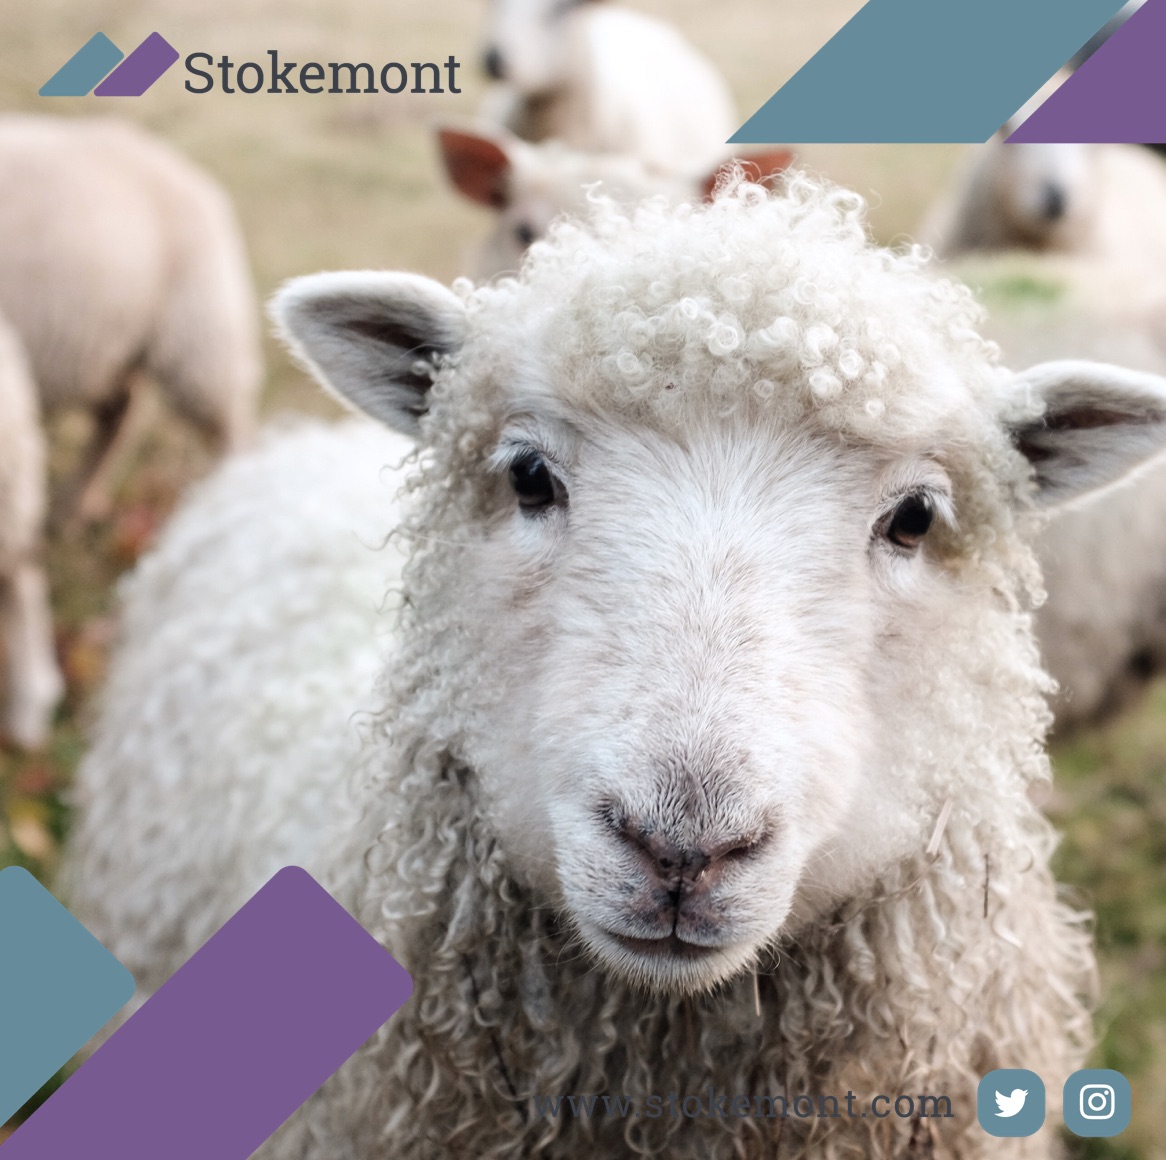 #Sheep #wool #insulation, is made up of the #waste product ‘off cuts’ #created through #shearing #sheep